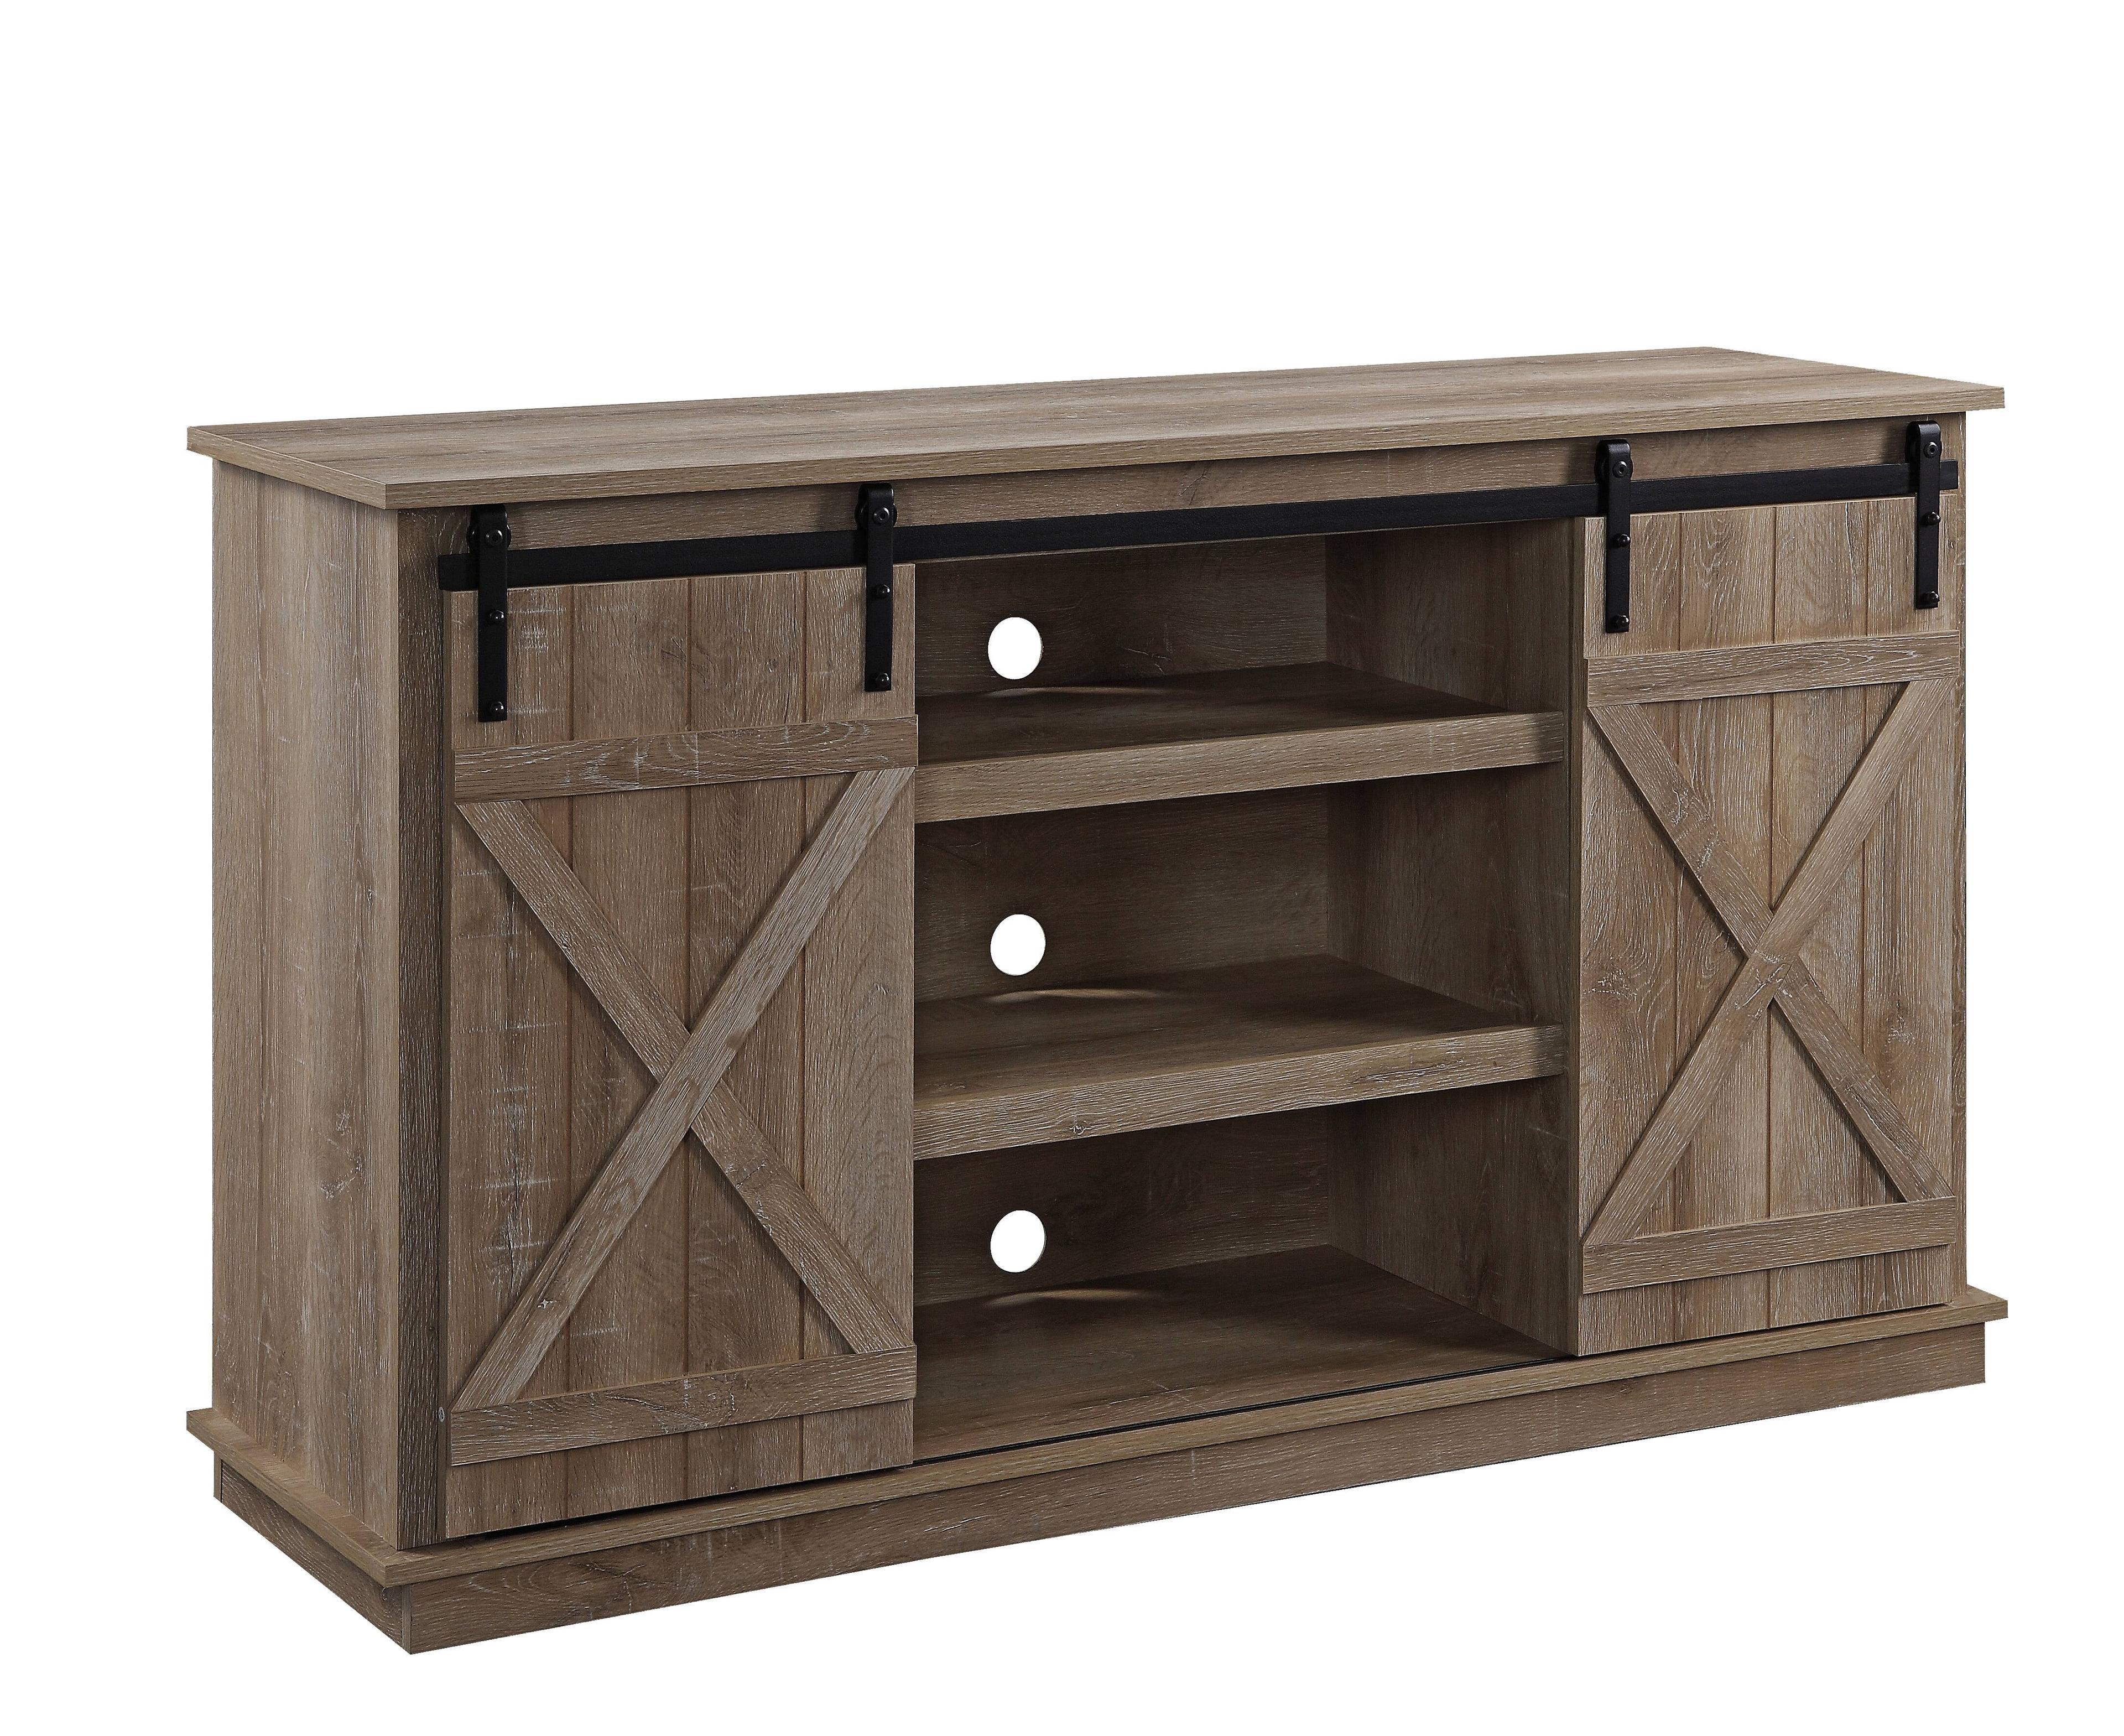 Gray Rustic 54" TV Stand with Sliding Barn Doors and Cable Management